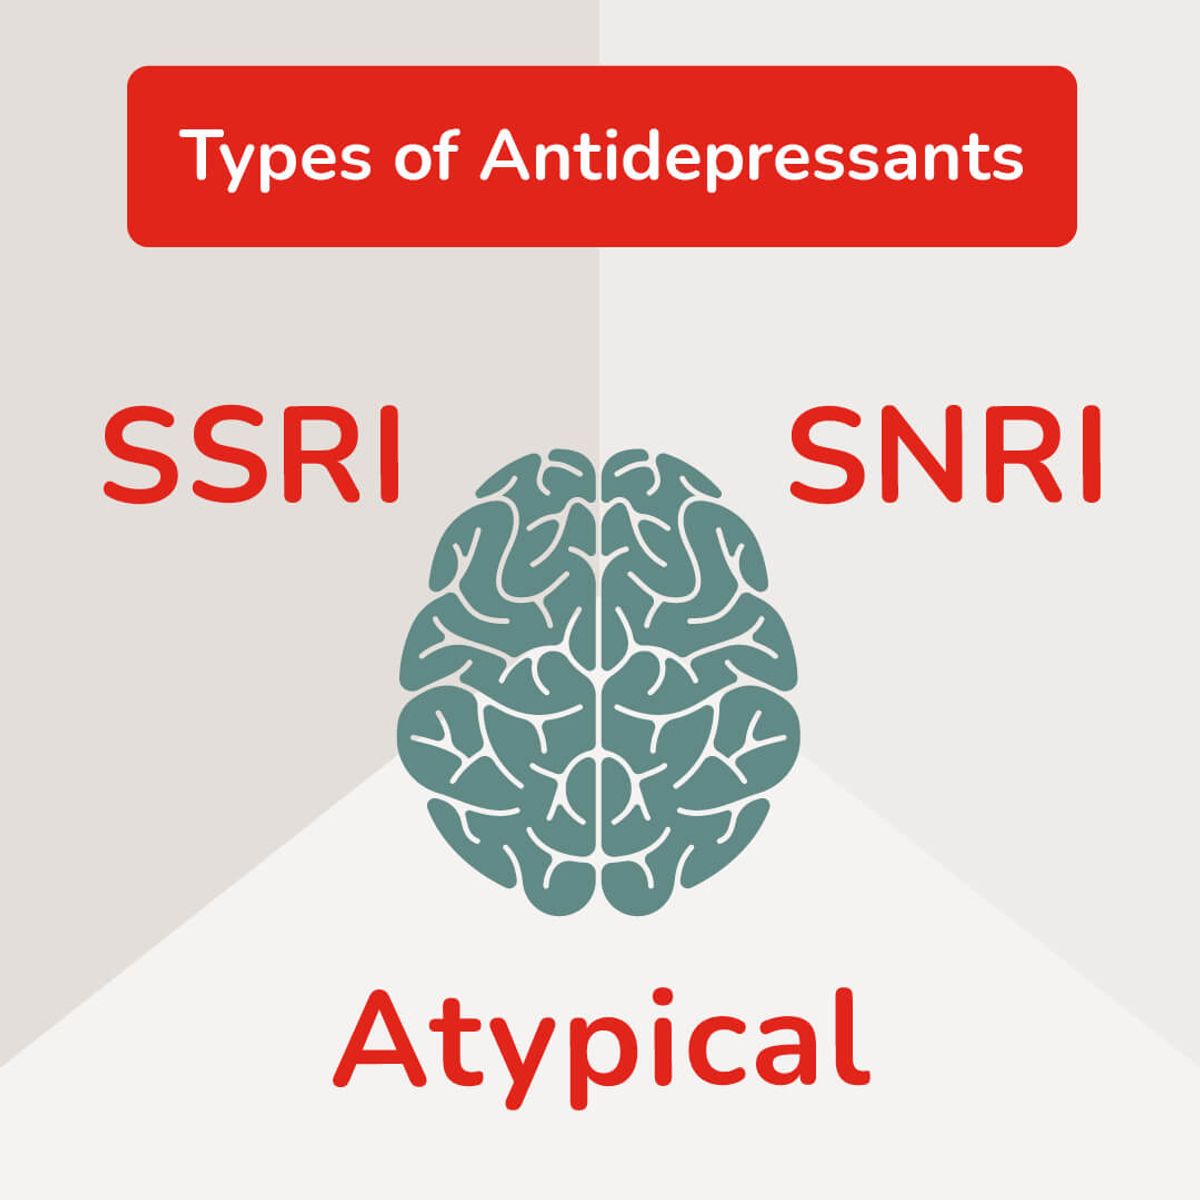 Types of Antidepressants: SSRIs, SNRIs, Atypical